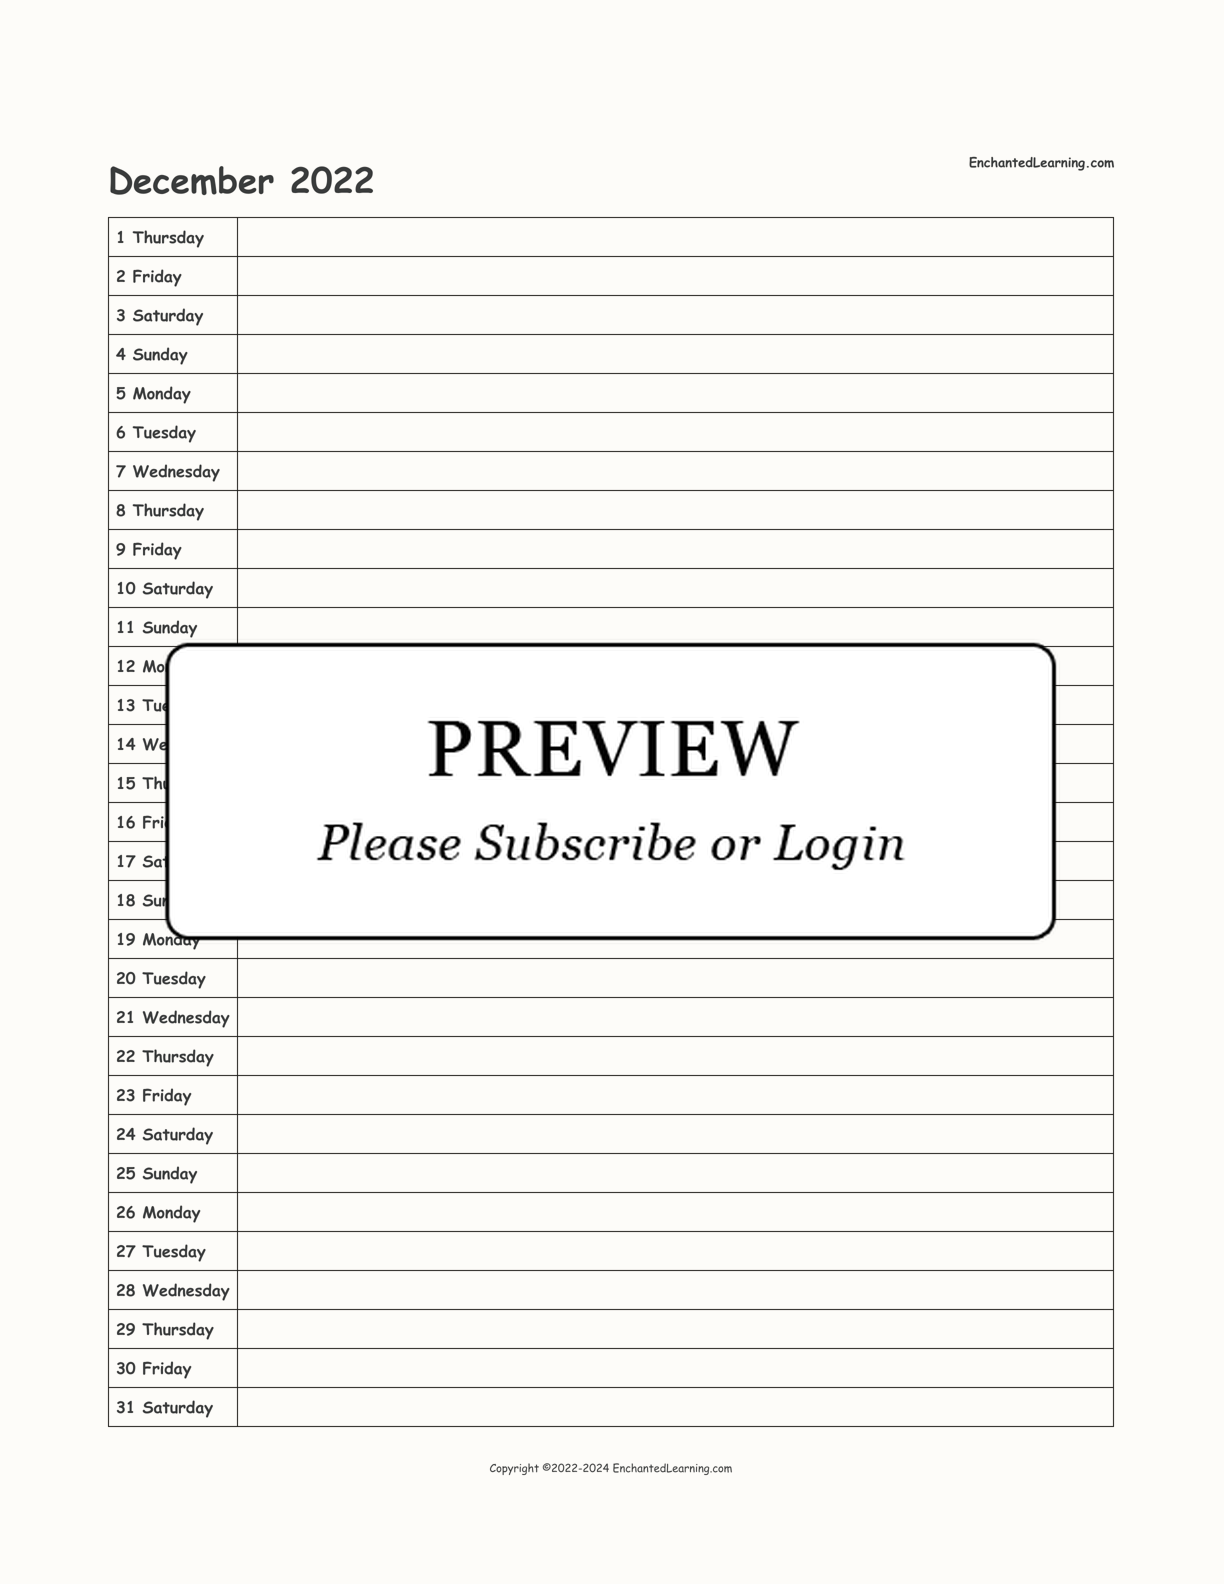 2022 Scheduling Calendar interactive printout page 12